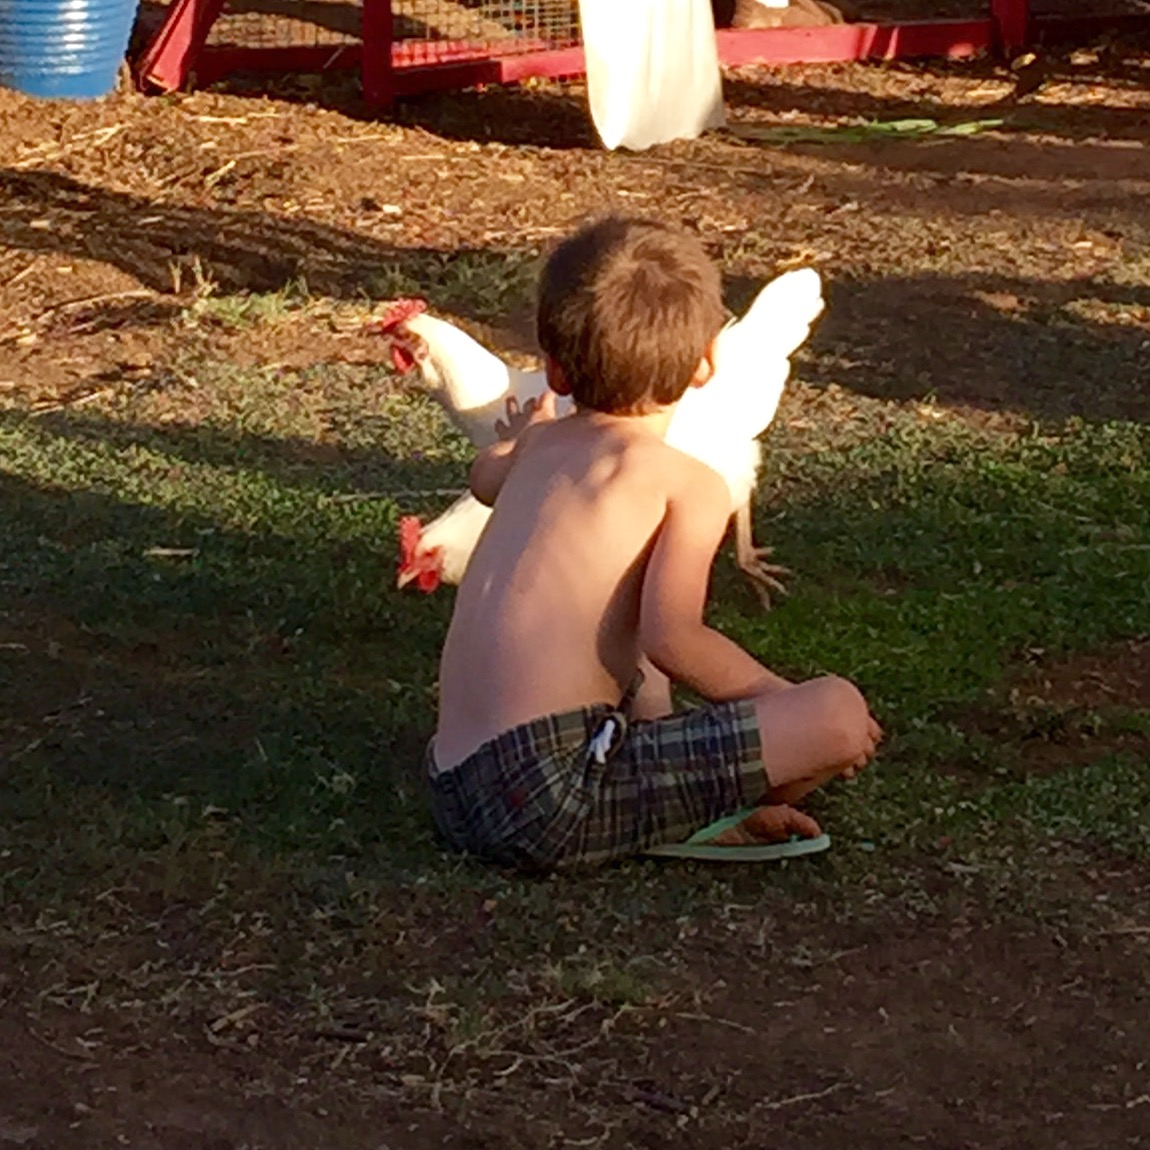 Grandson and hens.